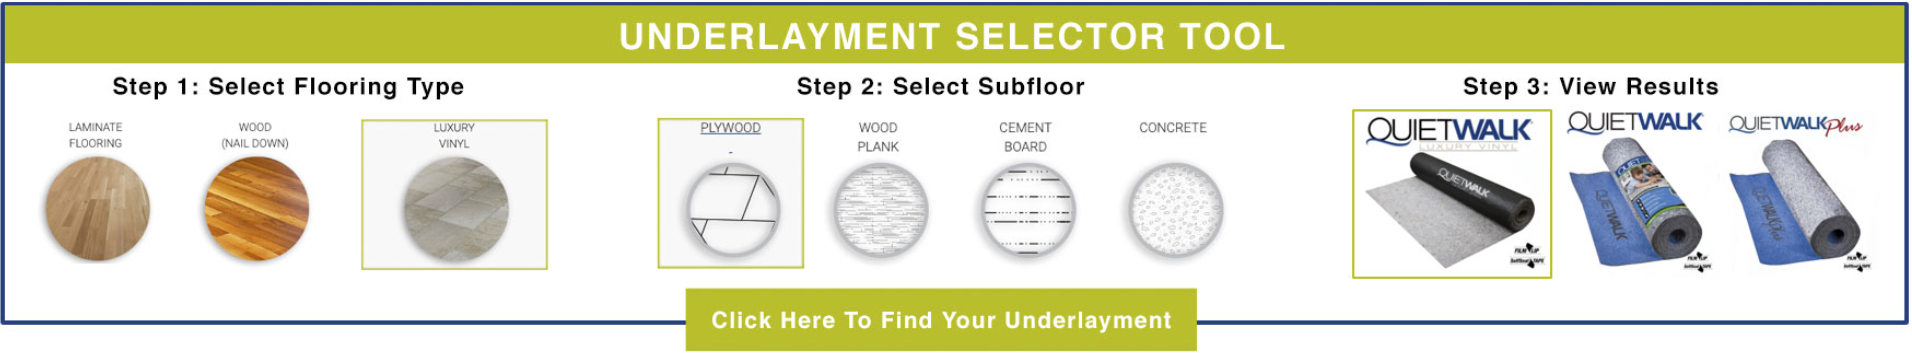 underlayment product selector tool 